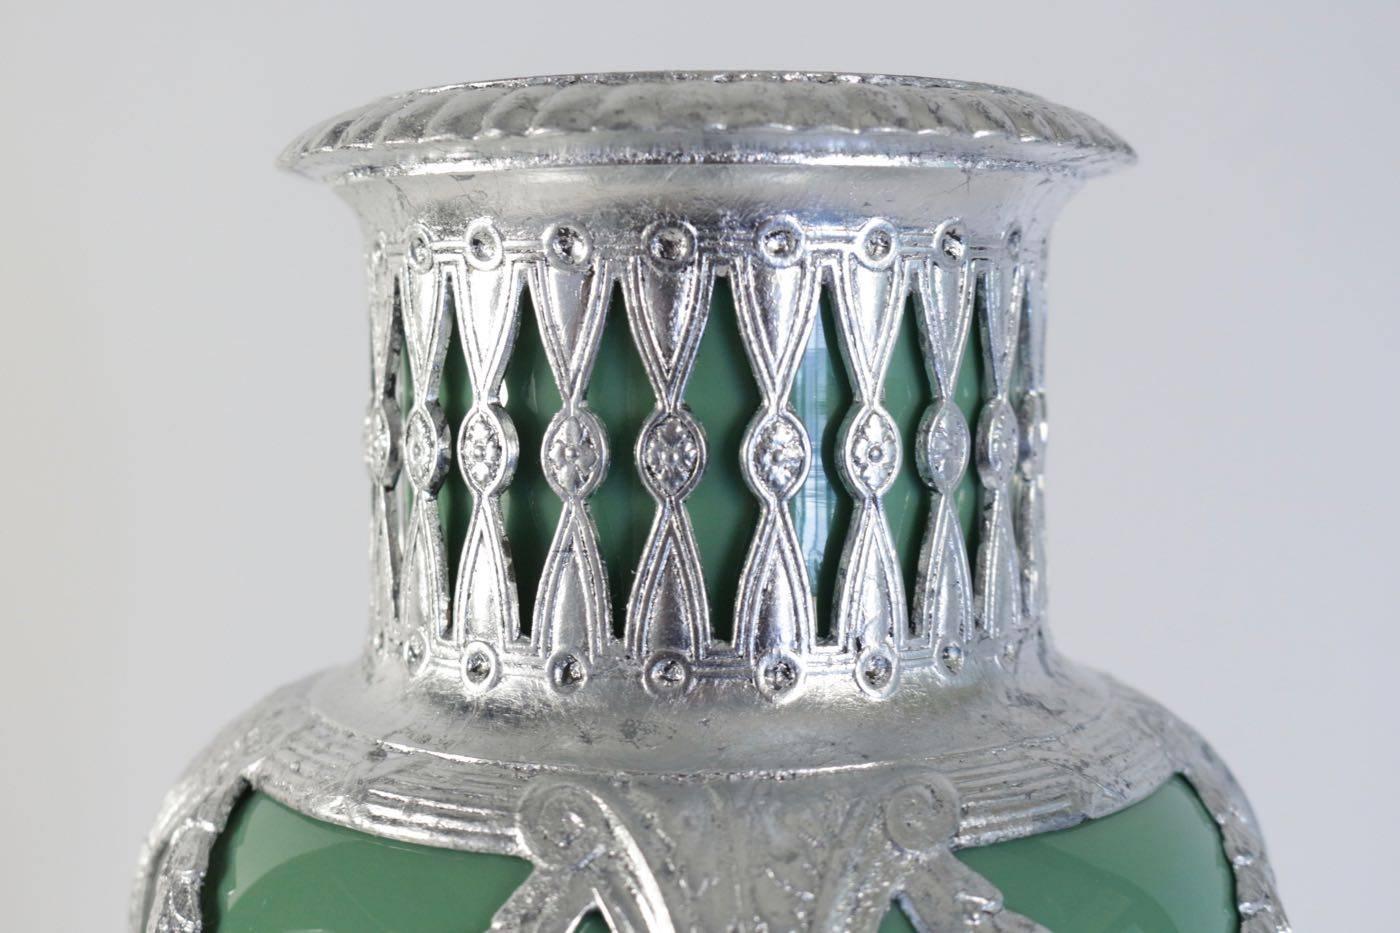 Silvered Celadon Vase in Faience, Silver Plate and Silver Leaf, 19th Century Period